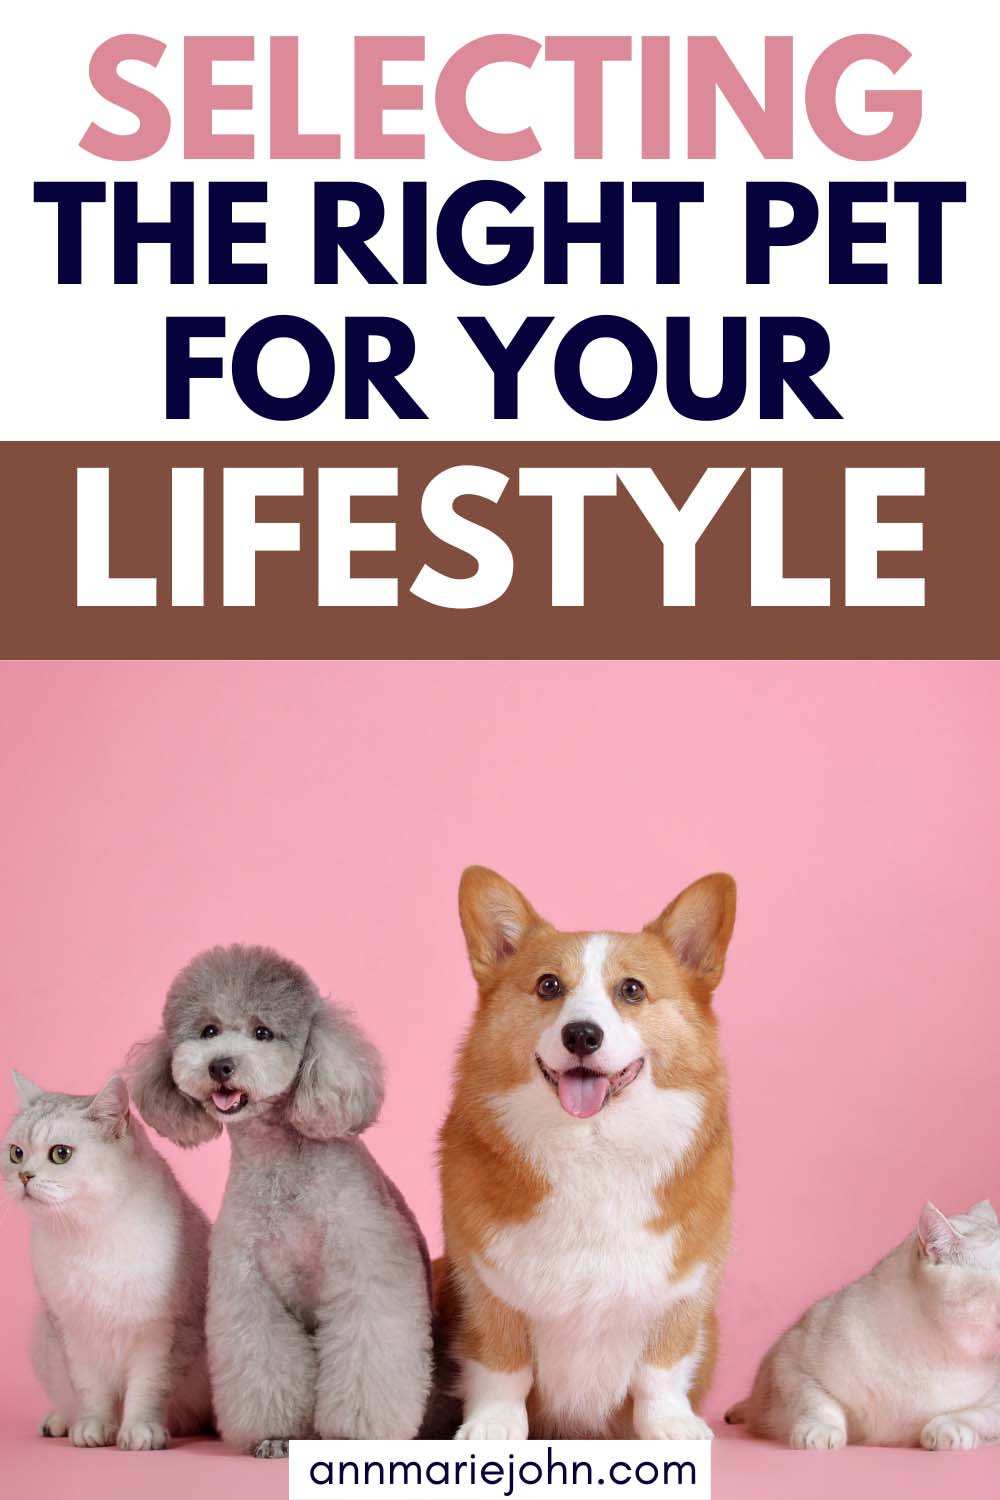 Selecting the Right Pet for Your Lifestyle